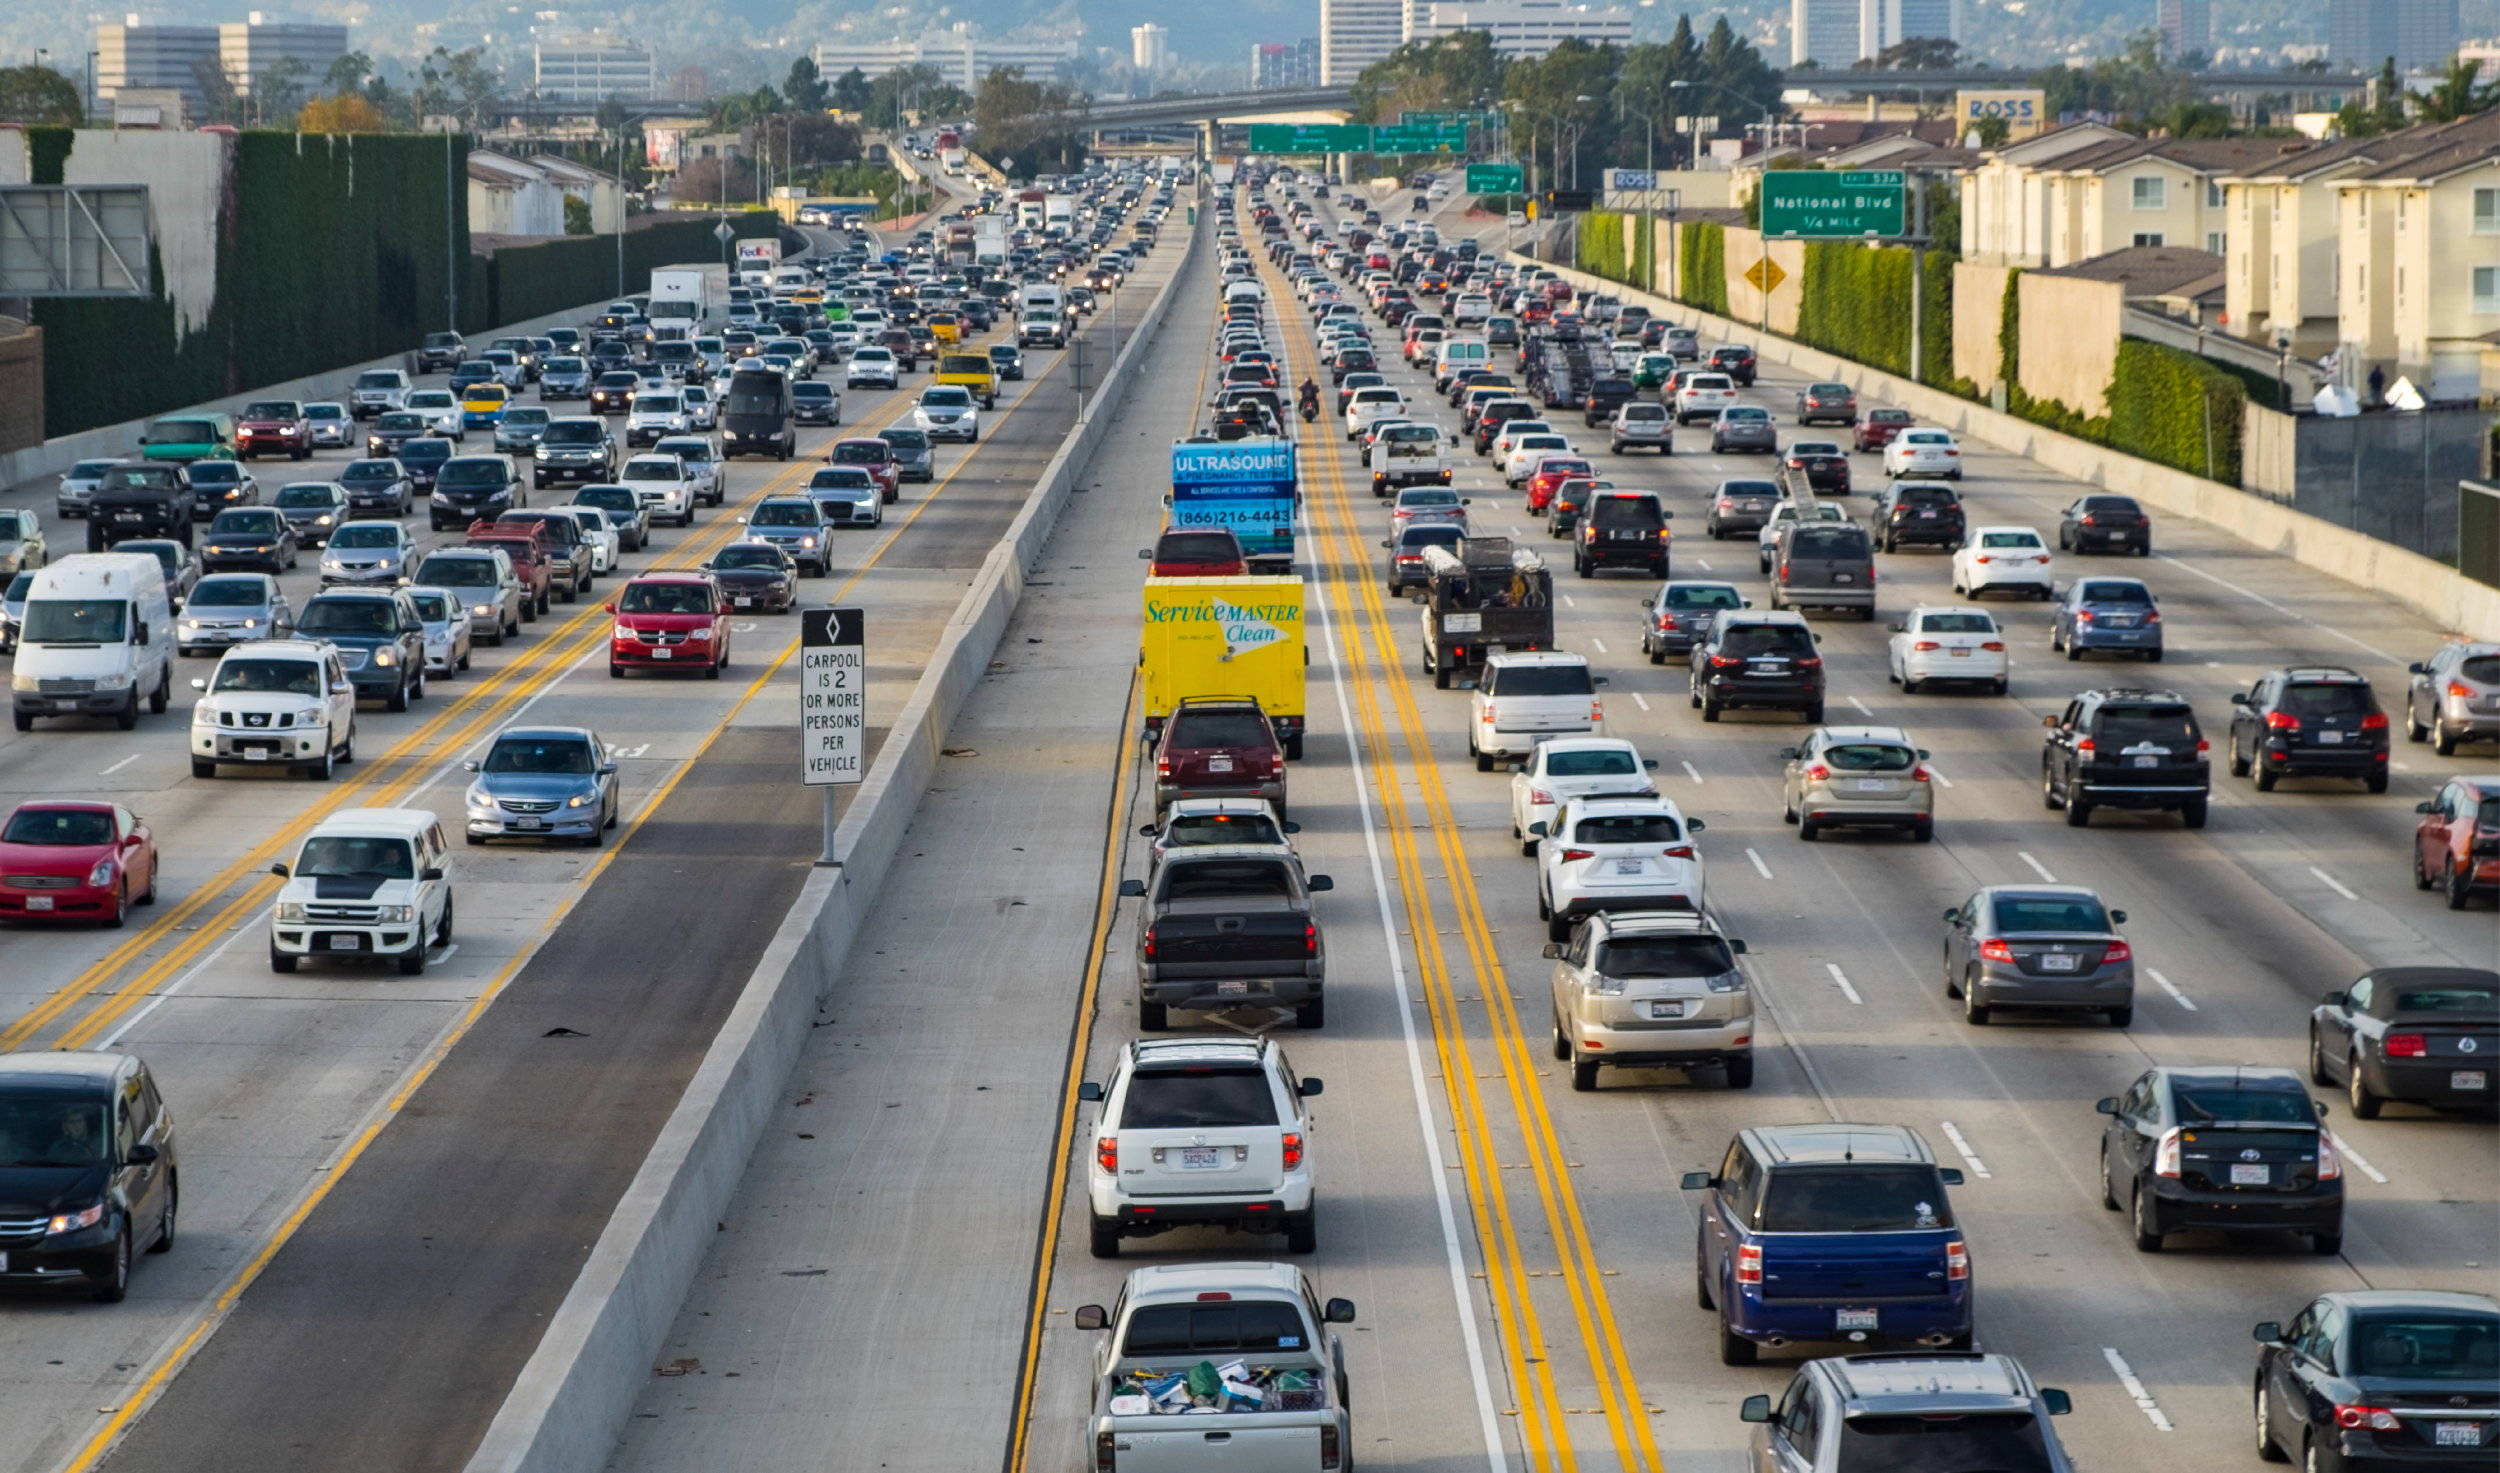 Traffic on the 405 Freeway in Los Angeles, after an expansion project